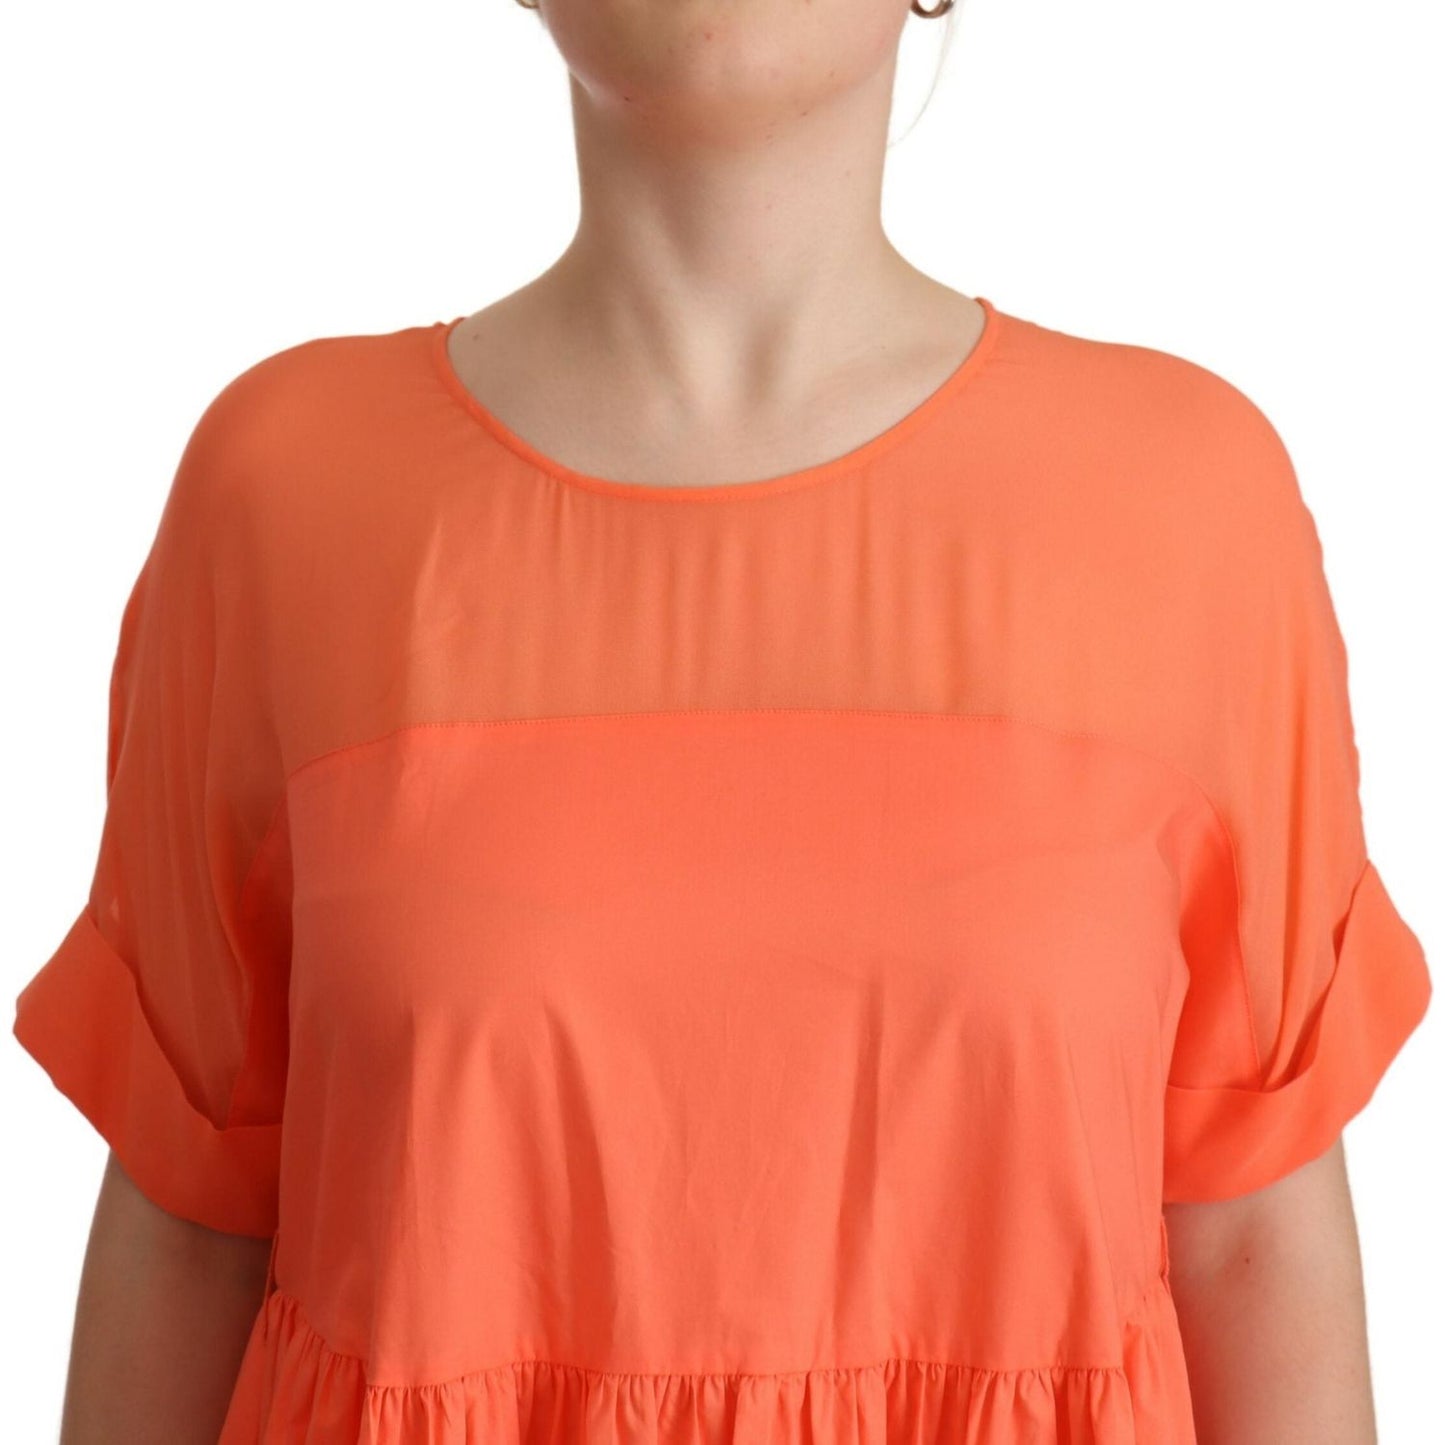 Twinset Elegant Coral Maxi Dress with Short Sleeves coral-cotton-blend-short-sleeves-maxi-shift-dress